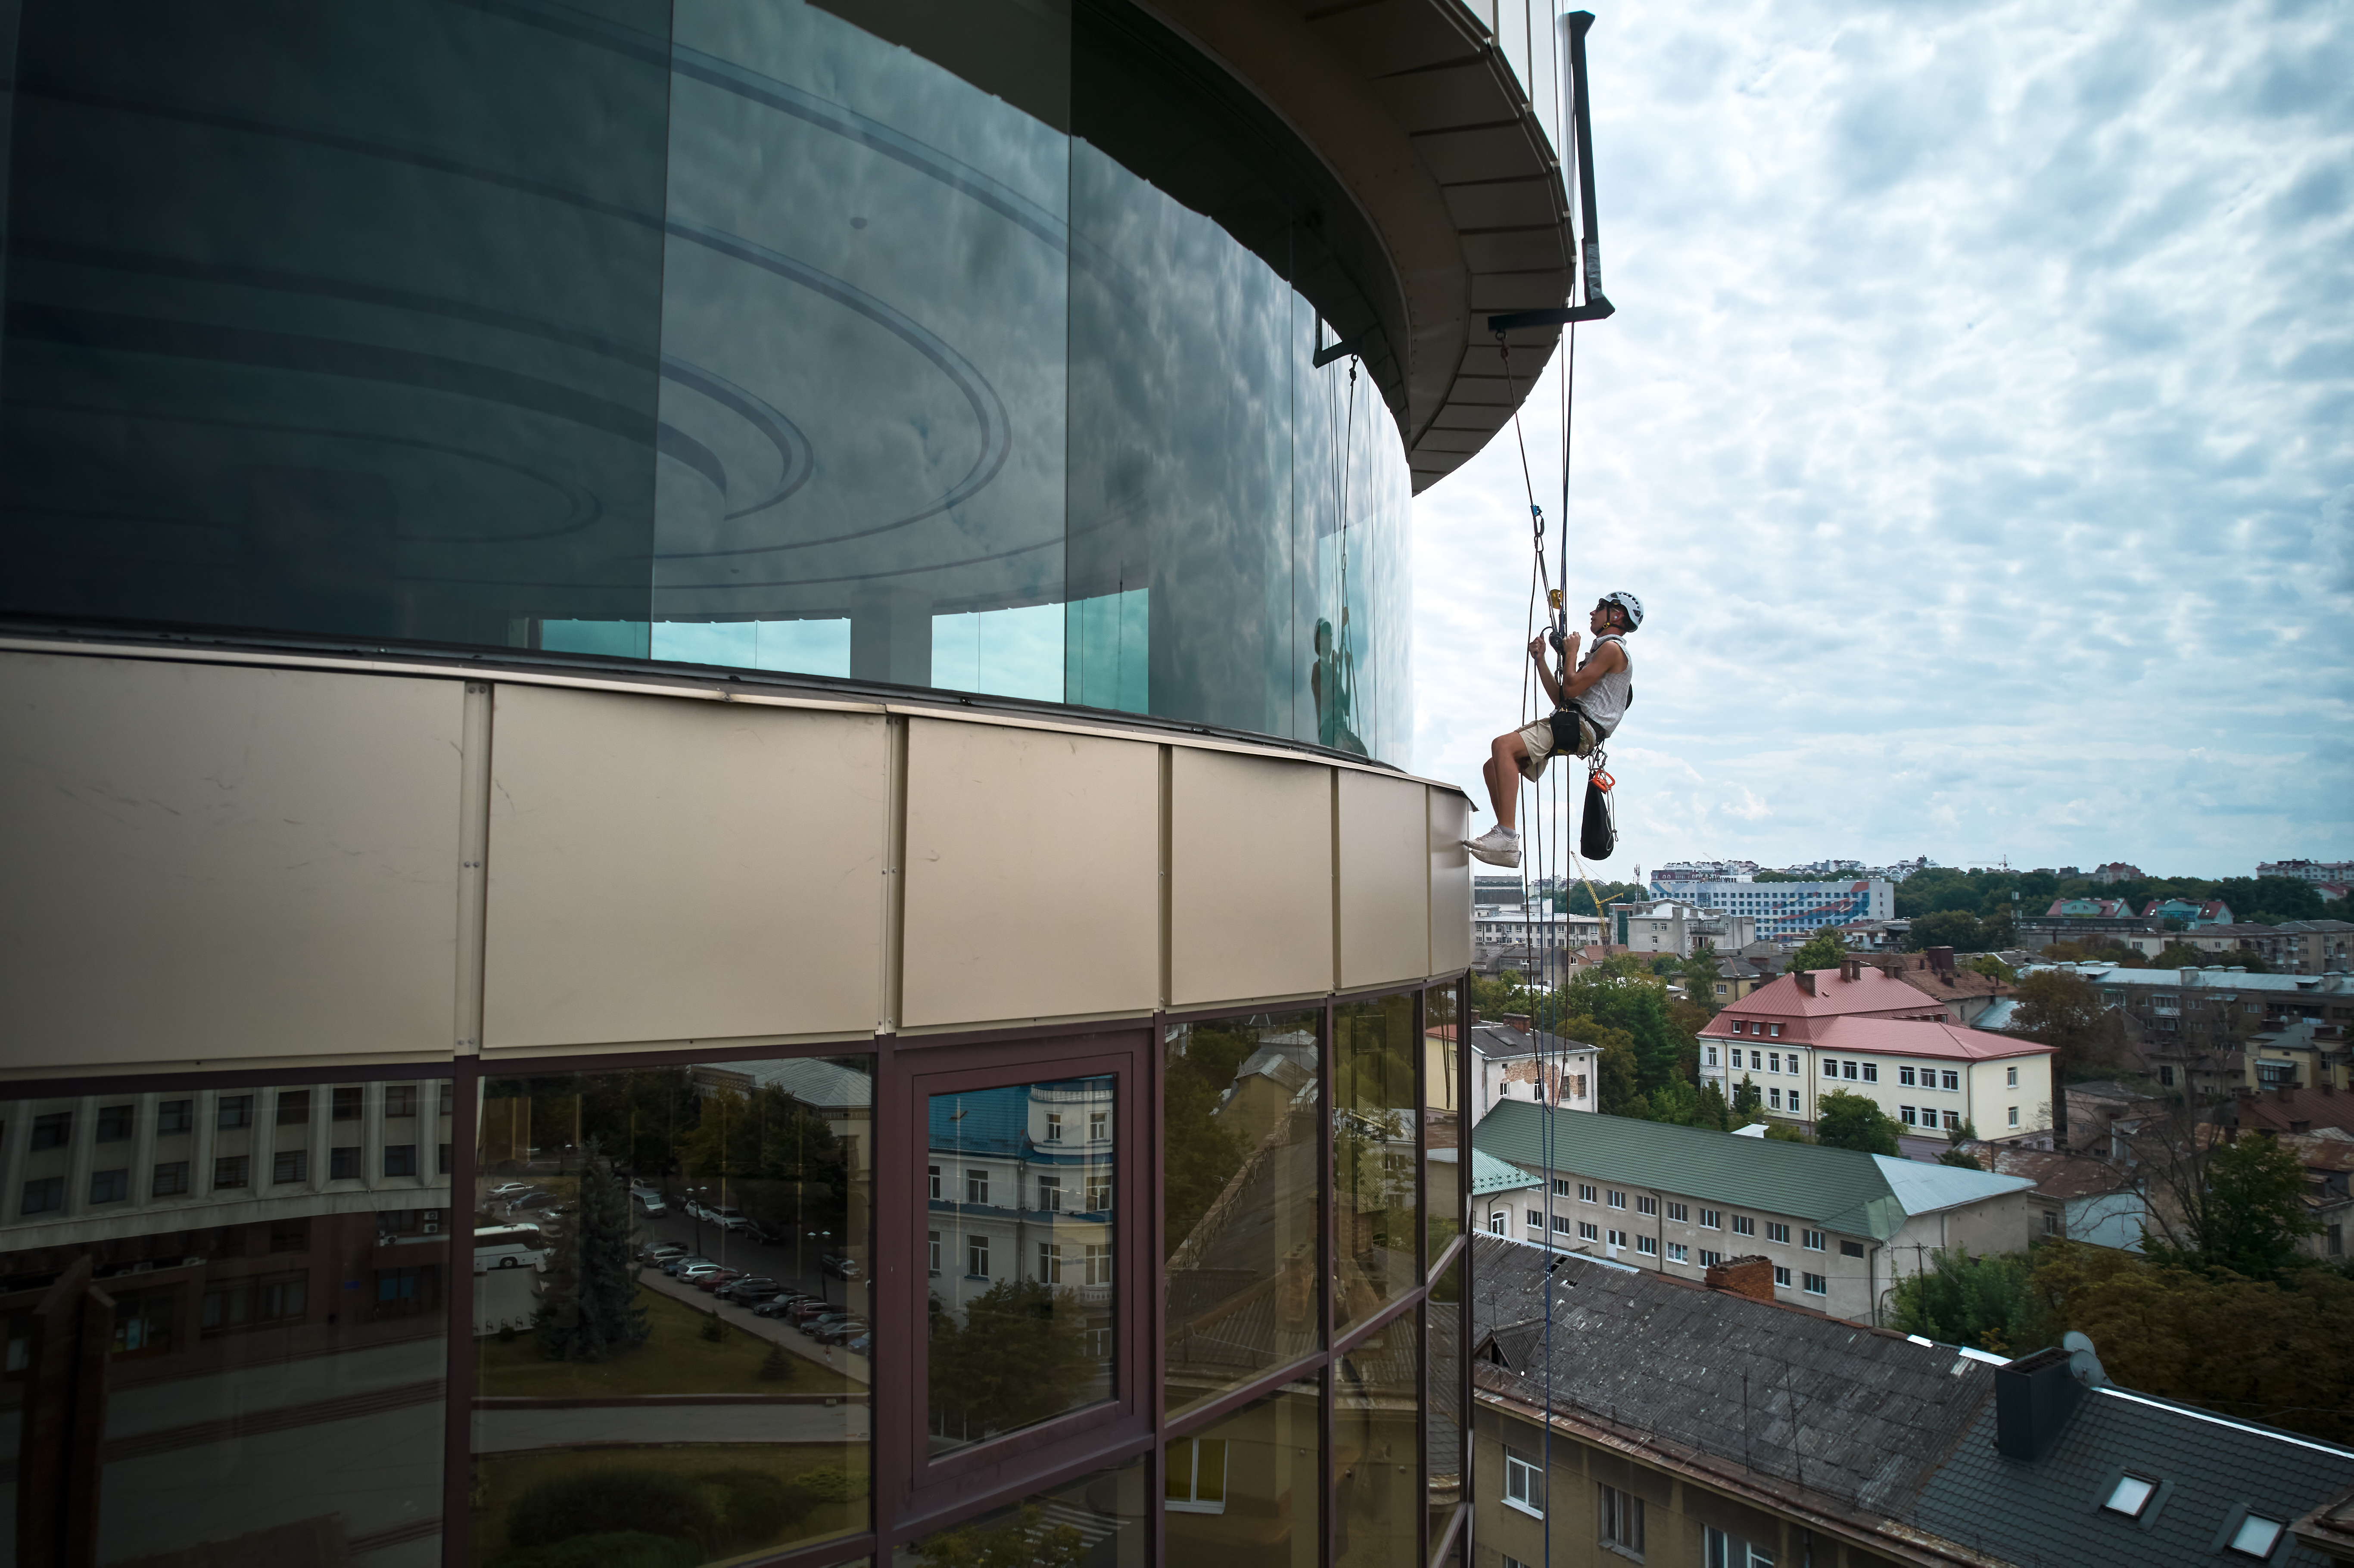 Commercial Window Cleaning: Alternative Solutions for Your Business